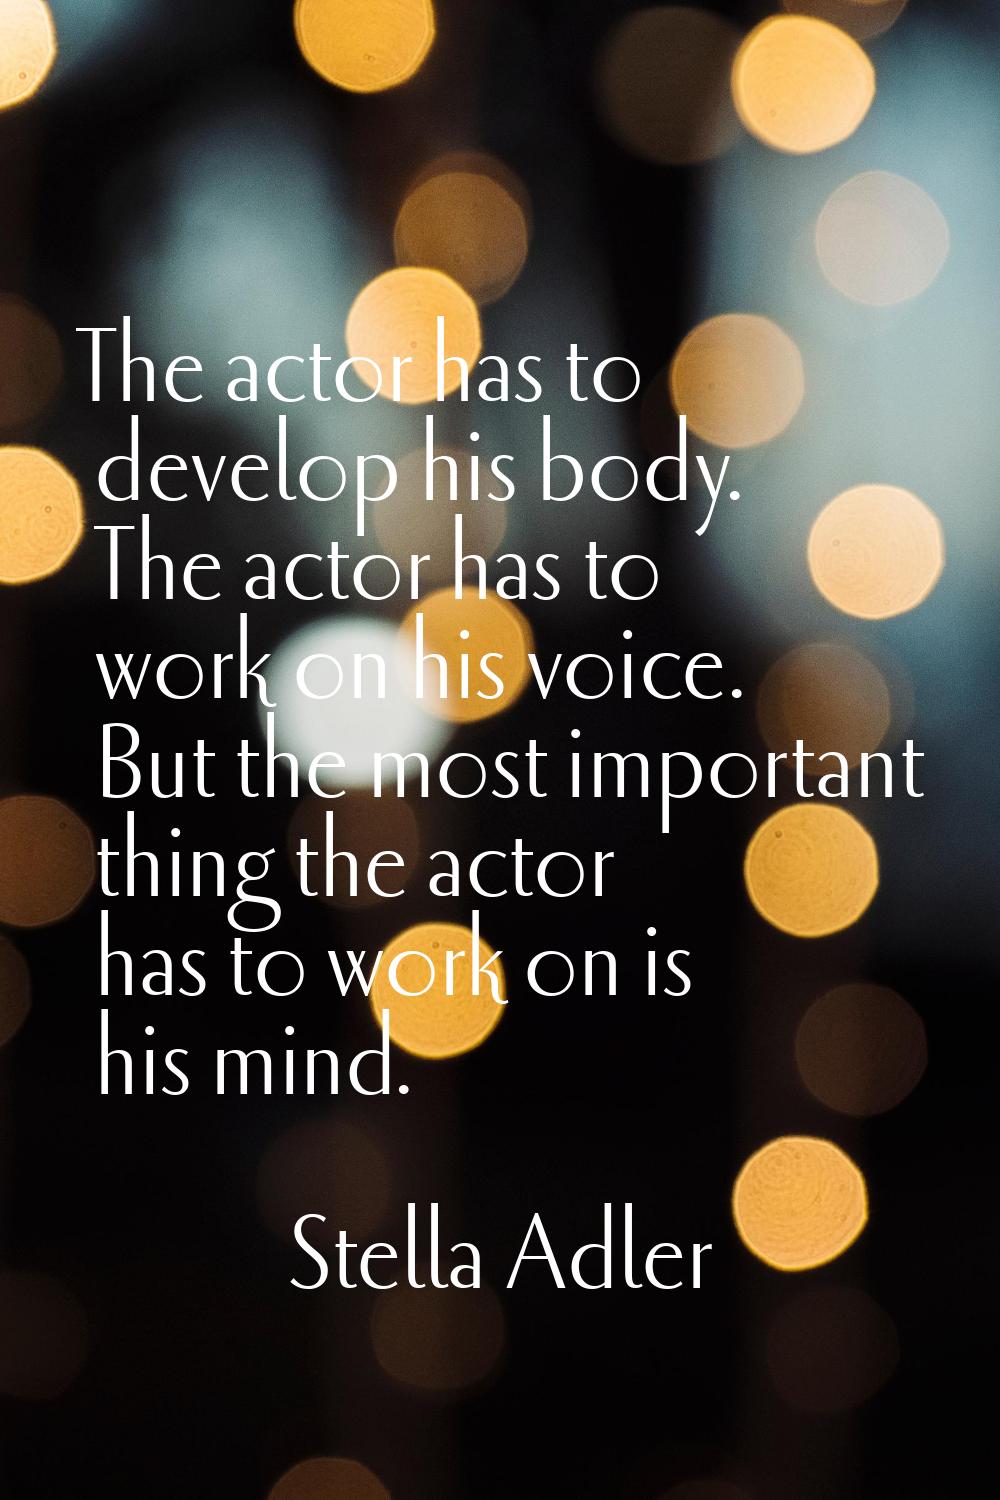 The actor has to develop his body. The actor has to work on his voice. But the most important thing